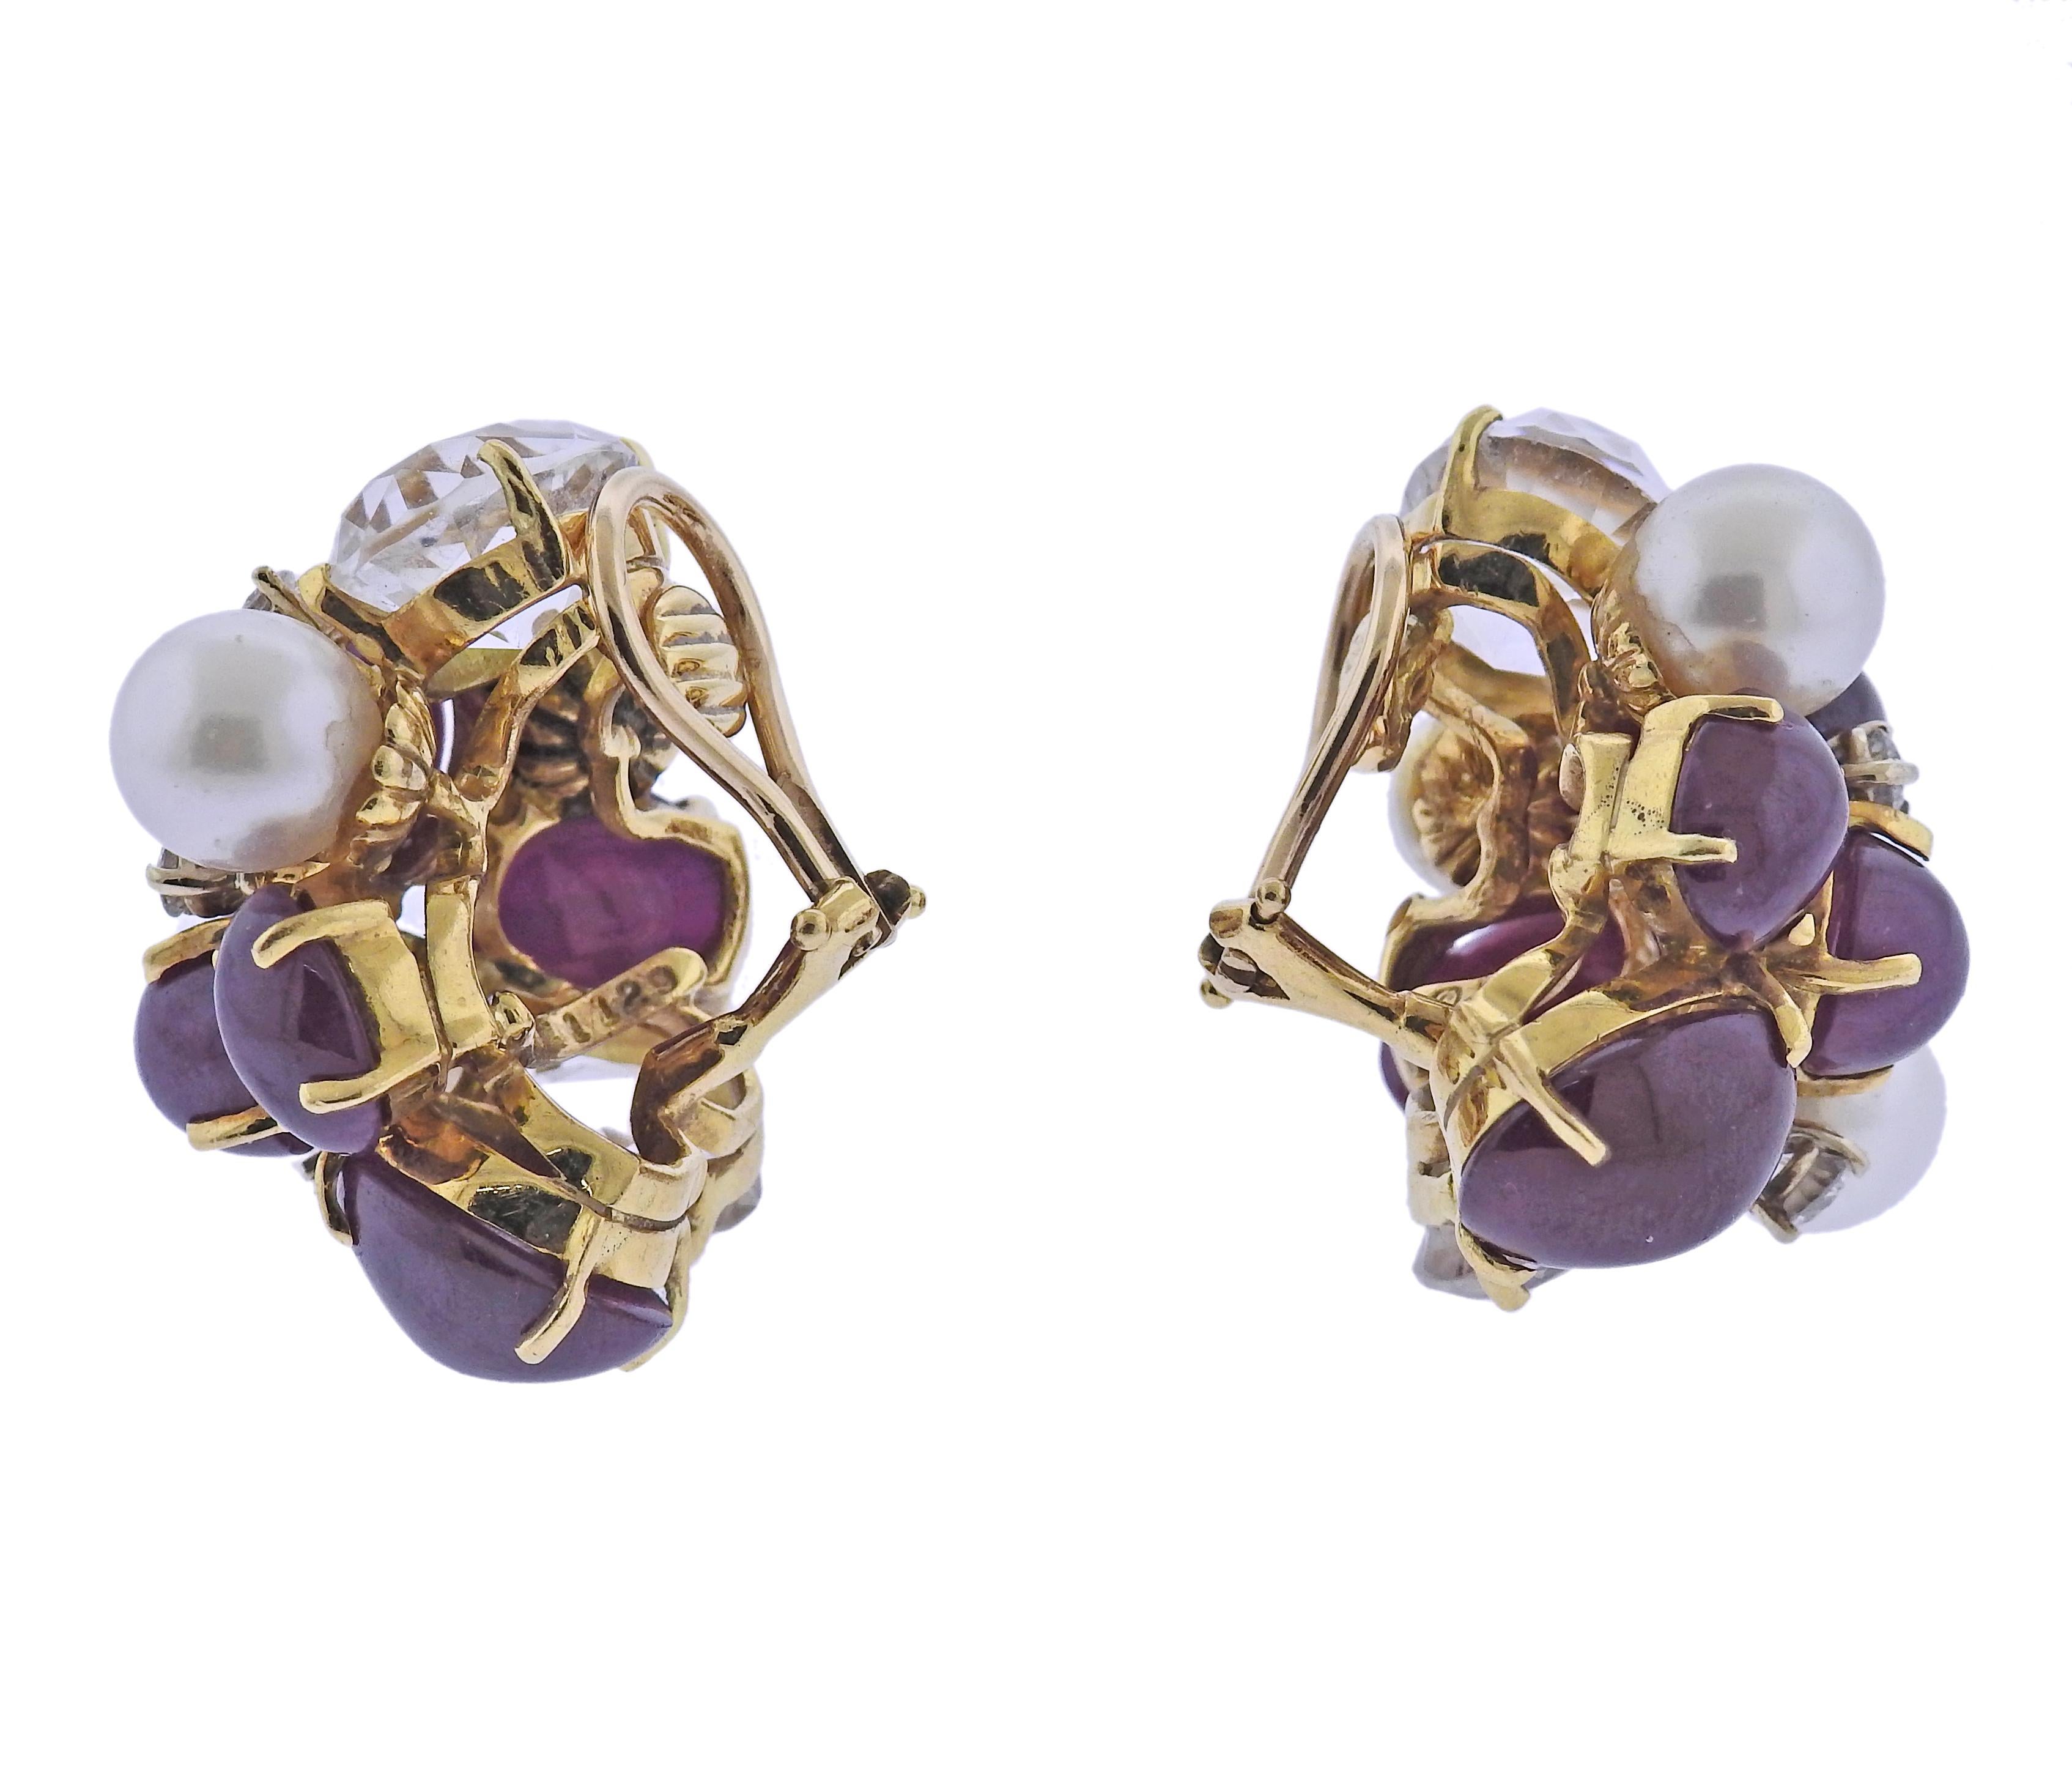 Pair of large 18k gold Bubble earrings by Seaman Schepps, set with ruby cabochons, crystals, pearls and approx. 0.70ctw G/VS diamonds. Earrings are 30mm x 25mm. Marked: Shell mark, 750, 11129. Weight - 36.6 grams.